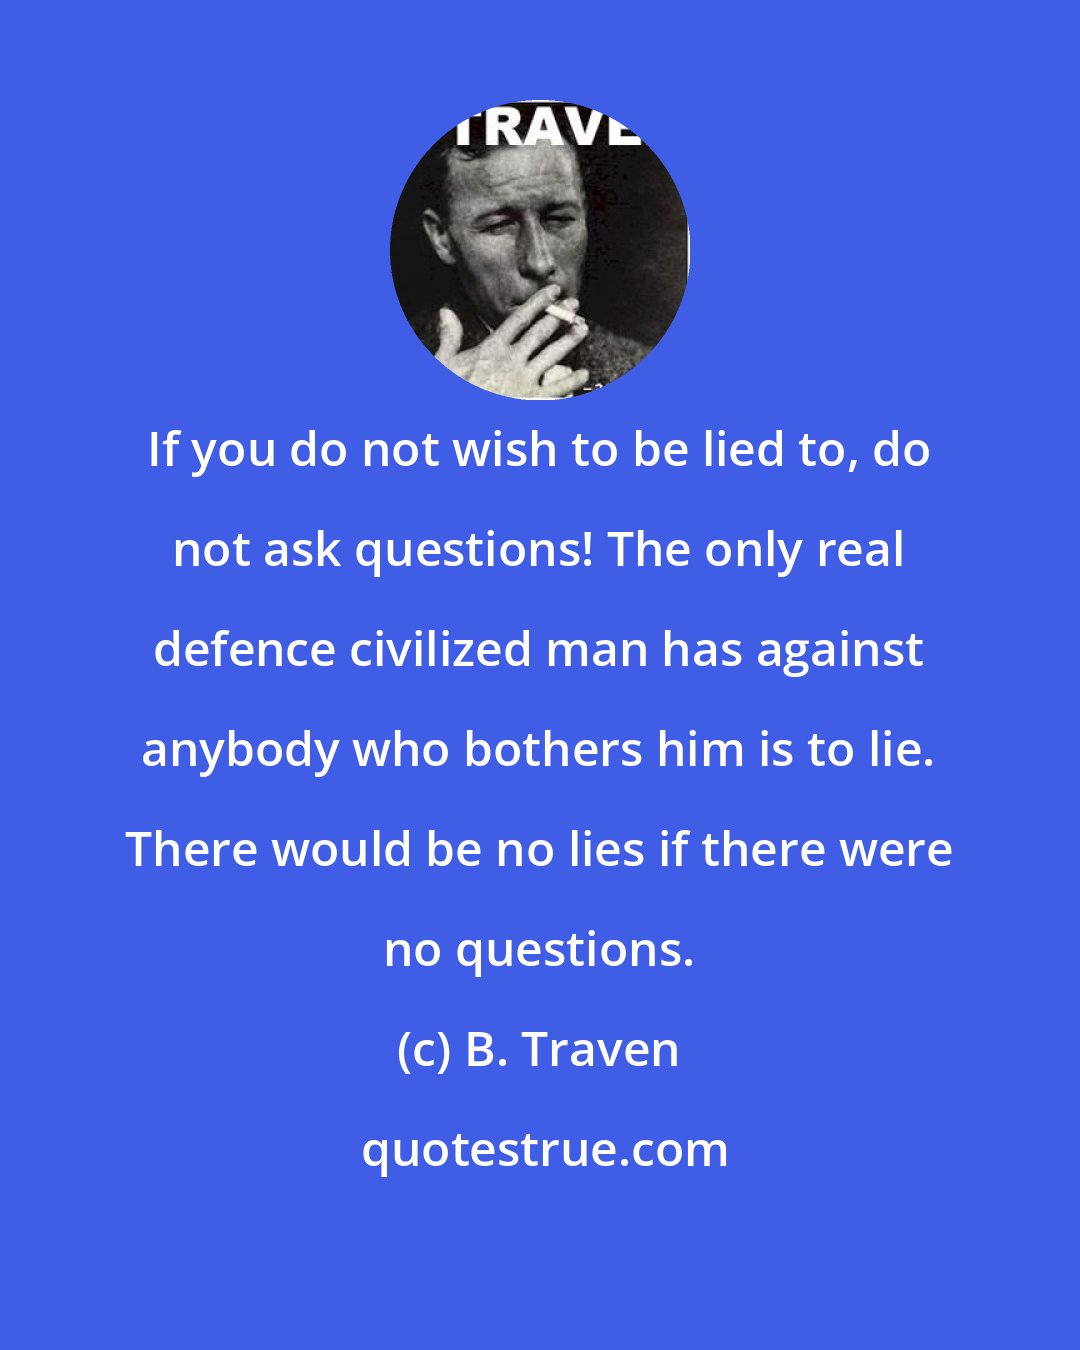 B. Traven: If you do not wish to be lied to, do not ask questions! The only real defence civilized man has against anybody who bothers him is to lie. There would be no lies if there were no questions.